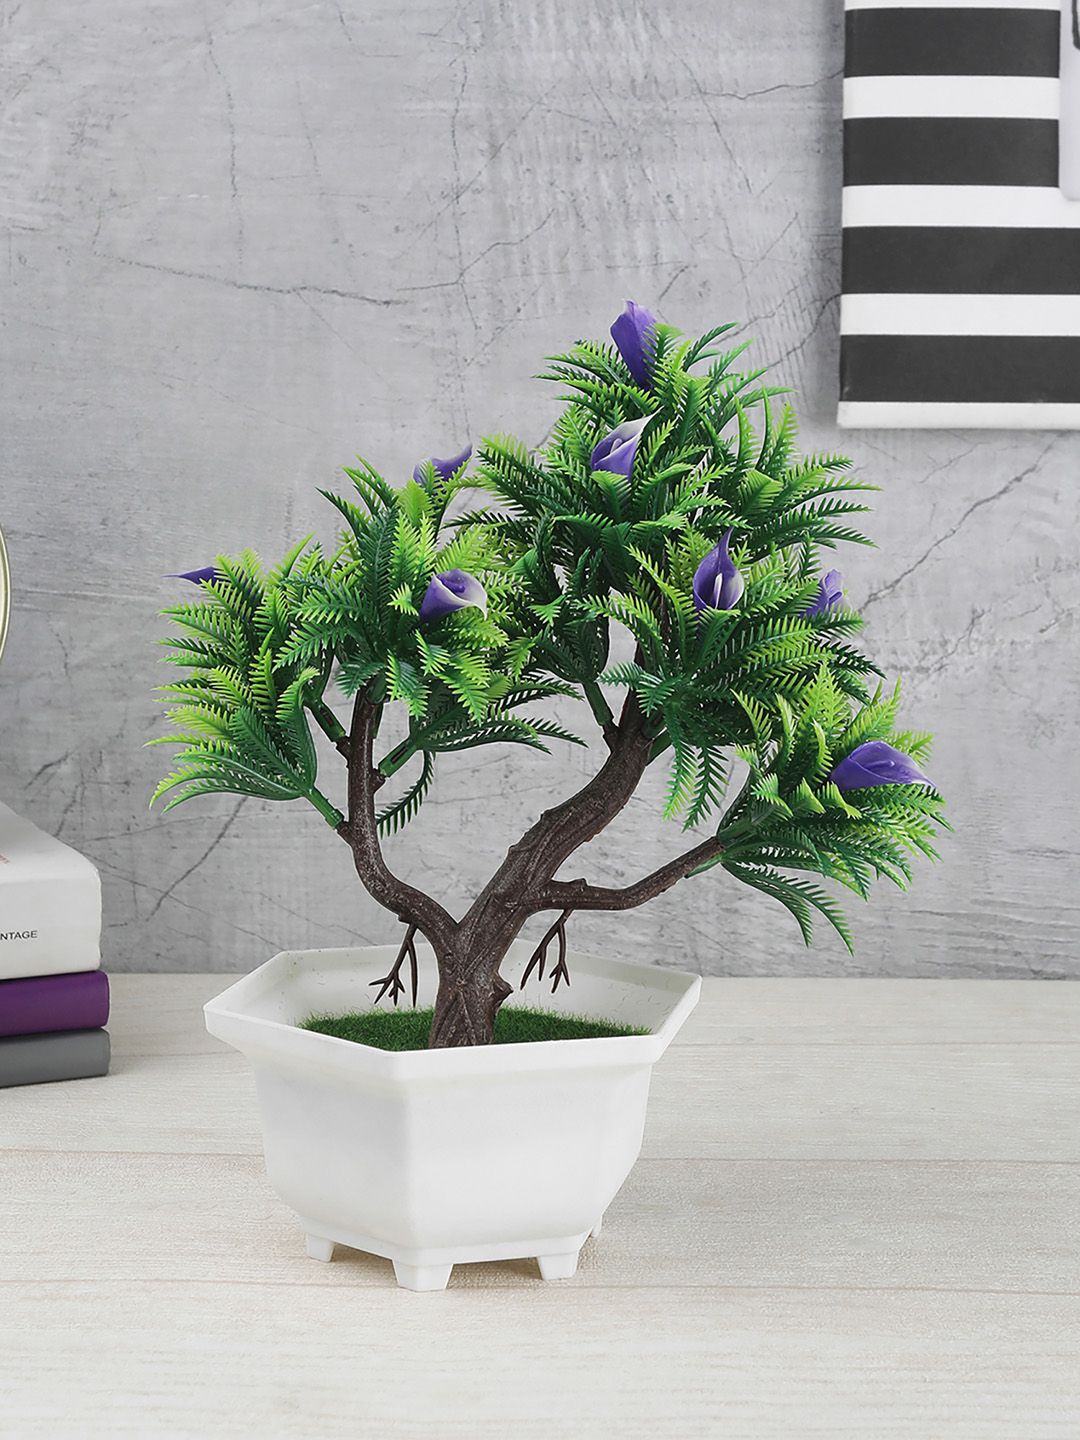 FOLIYAJ Green & Purple Artificial 3 Branched Bonsai Tree With Fern Leaves Flowers & White Pot Price in India